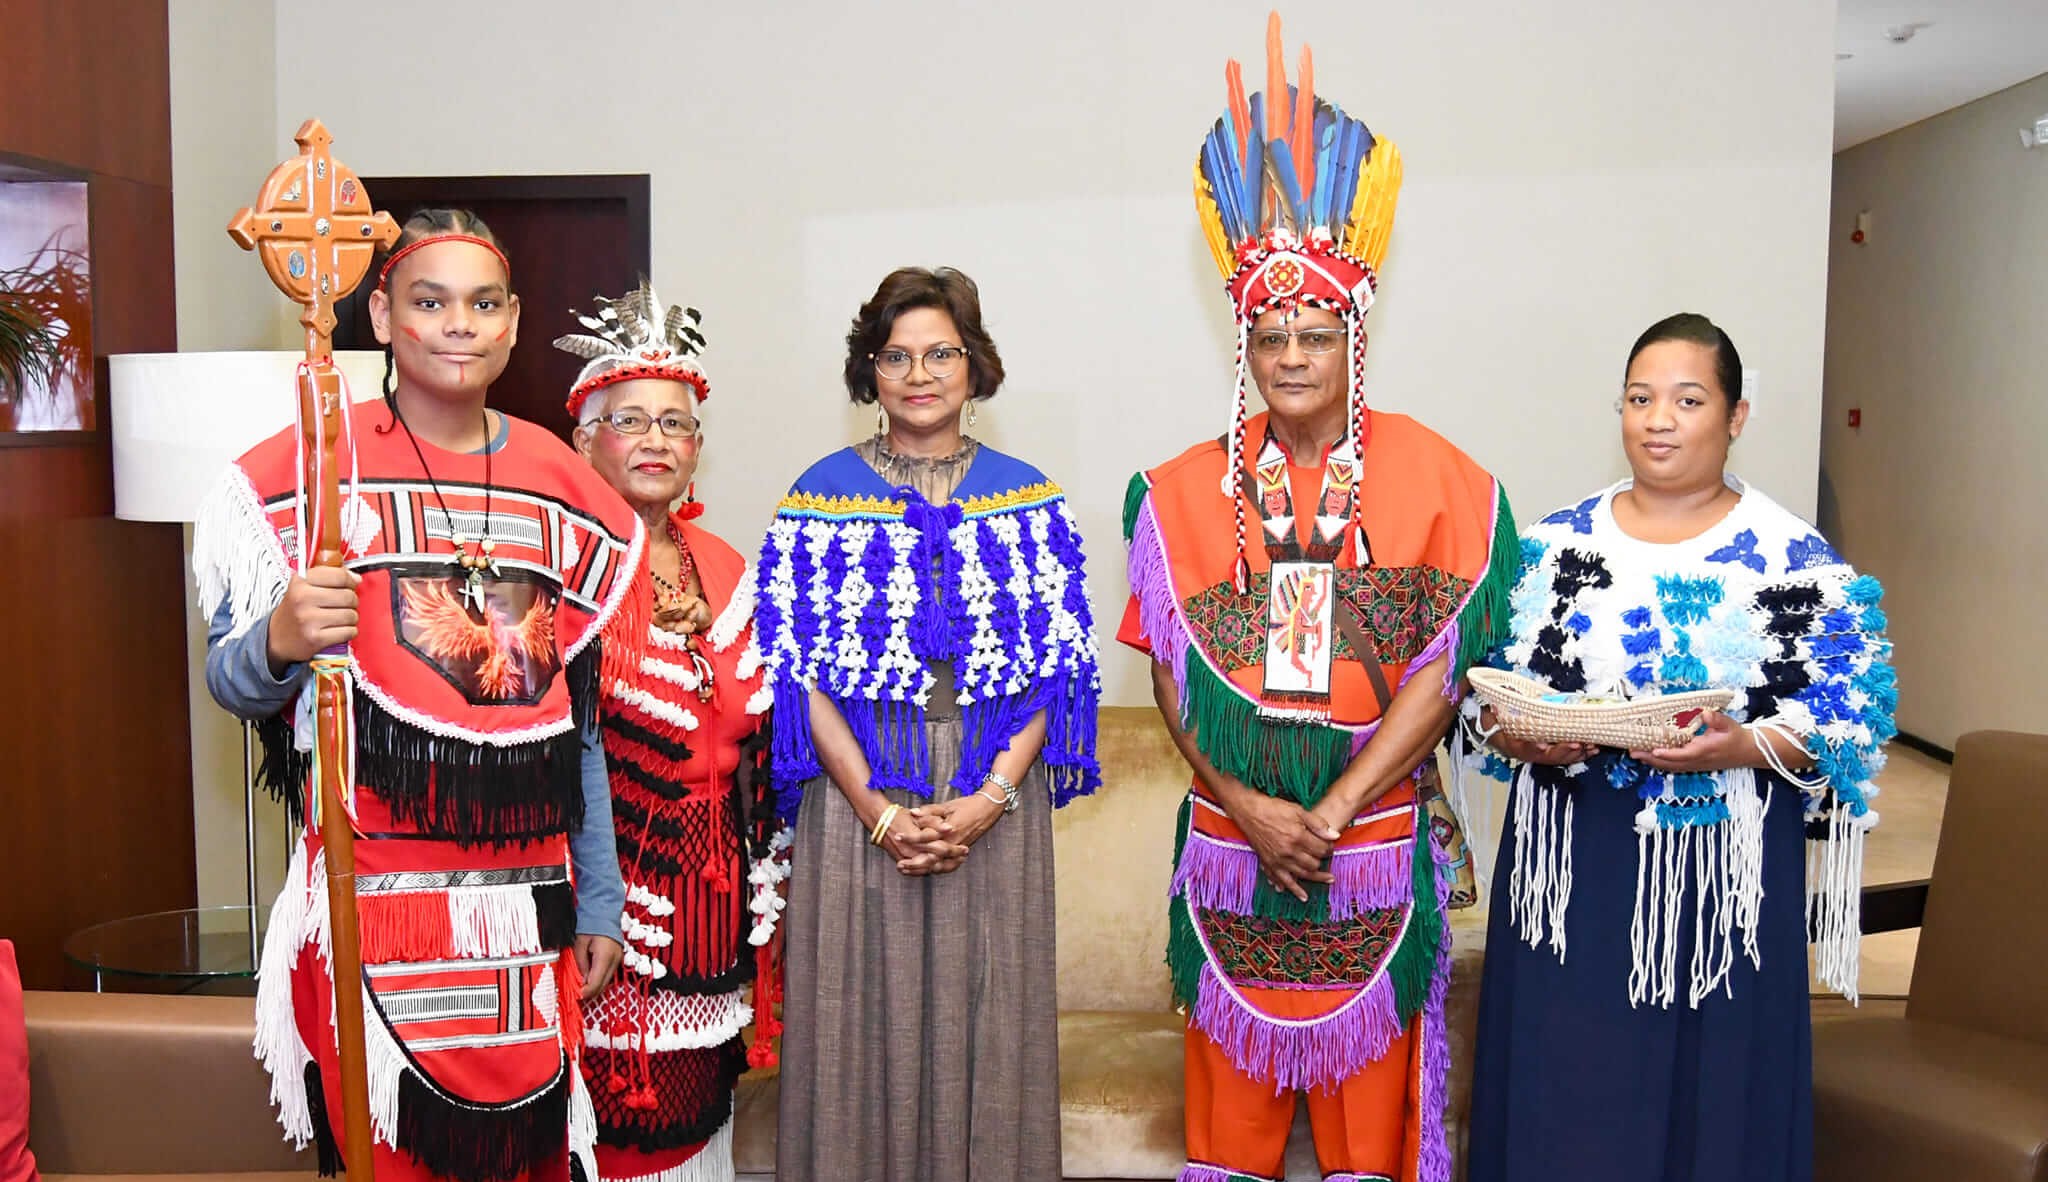 Her Excellency Attends Benefit Event of the Santa Rosa First People’s Community